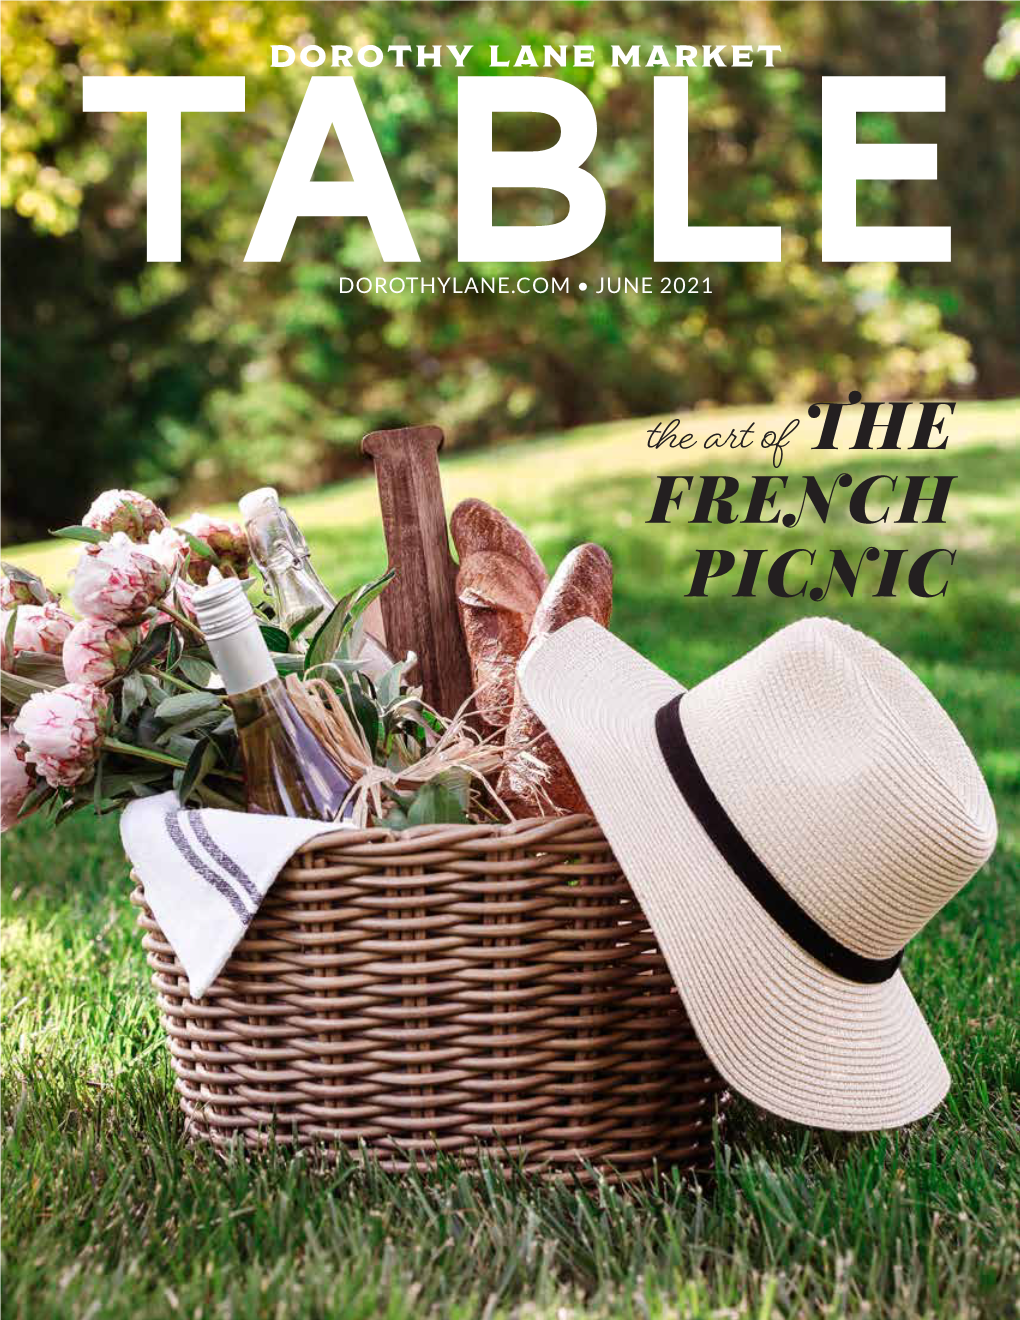 The French Picnic